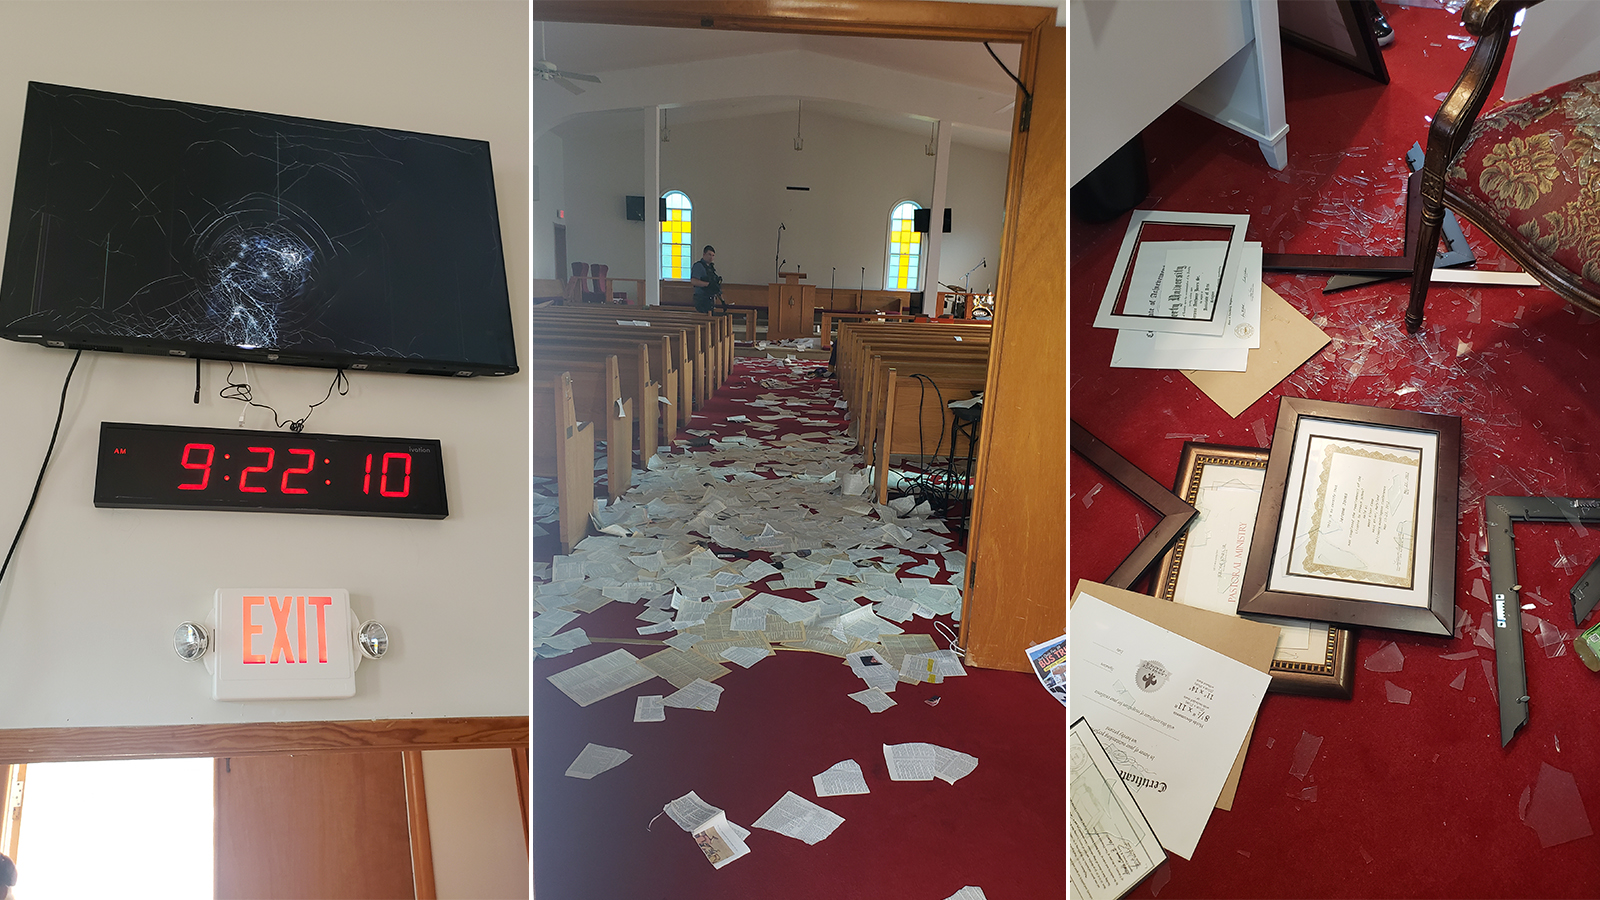 Widespread vandalism was discovered at Fowler United Methodist Church in Annapolis, Md., on June 9, 2023. Photos courtesy of Fowler UMC